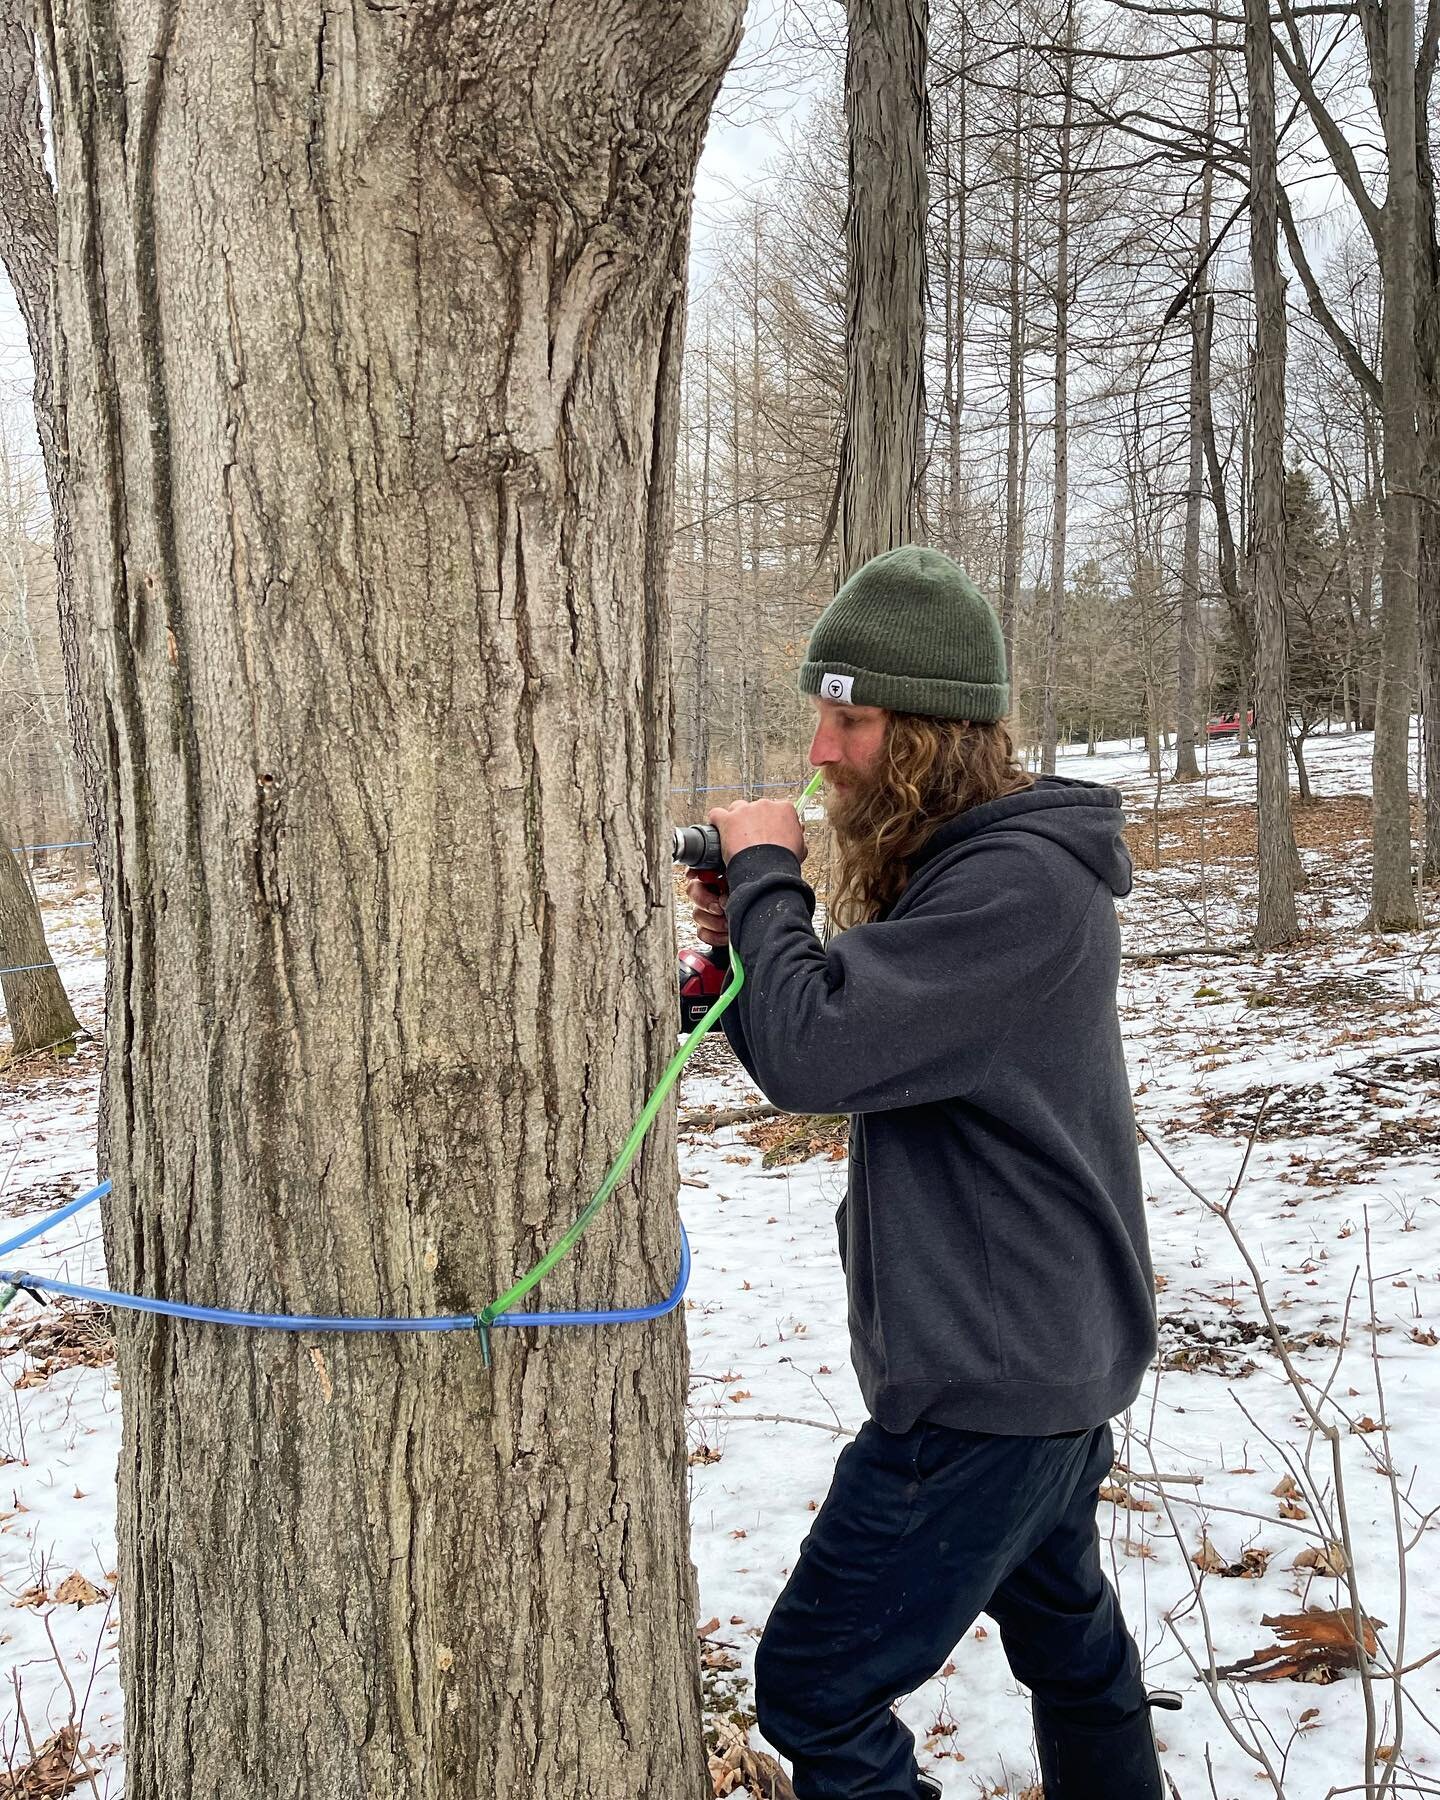 First day of the 2023 maple season! The sap was running while we spent the day in our sugar bush tapping our trees! Looking forward to the first boil in a few days. 🍁